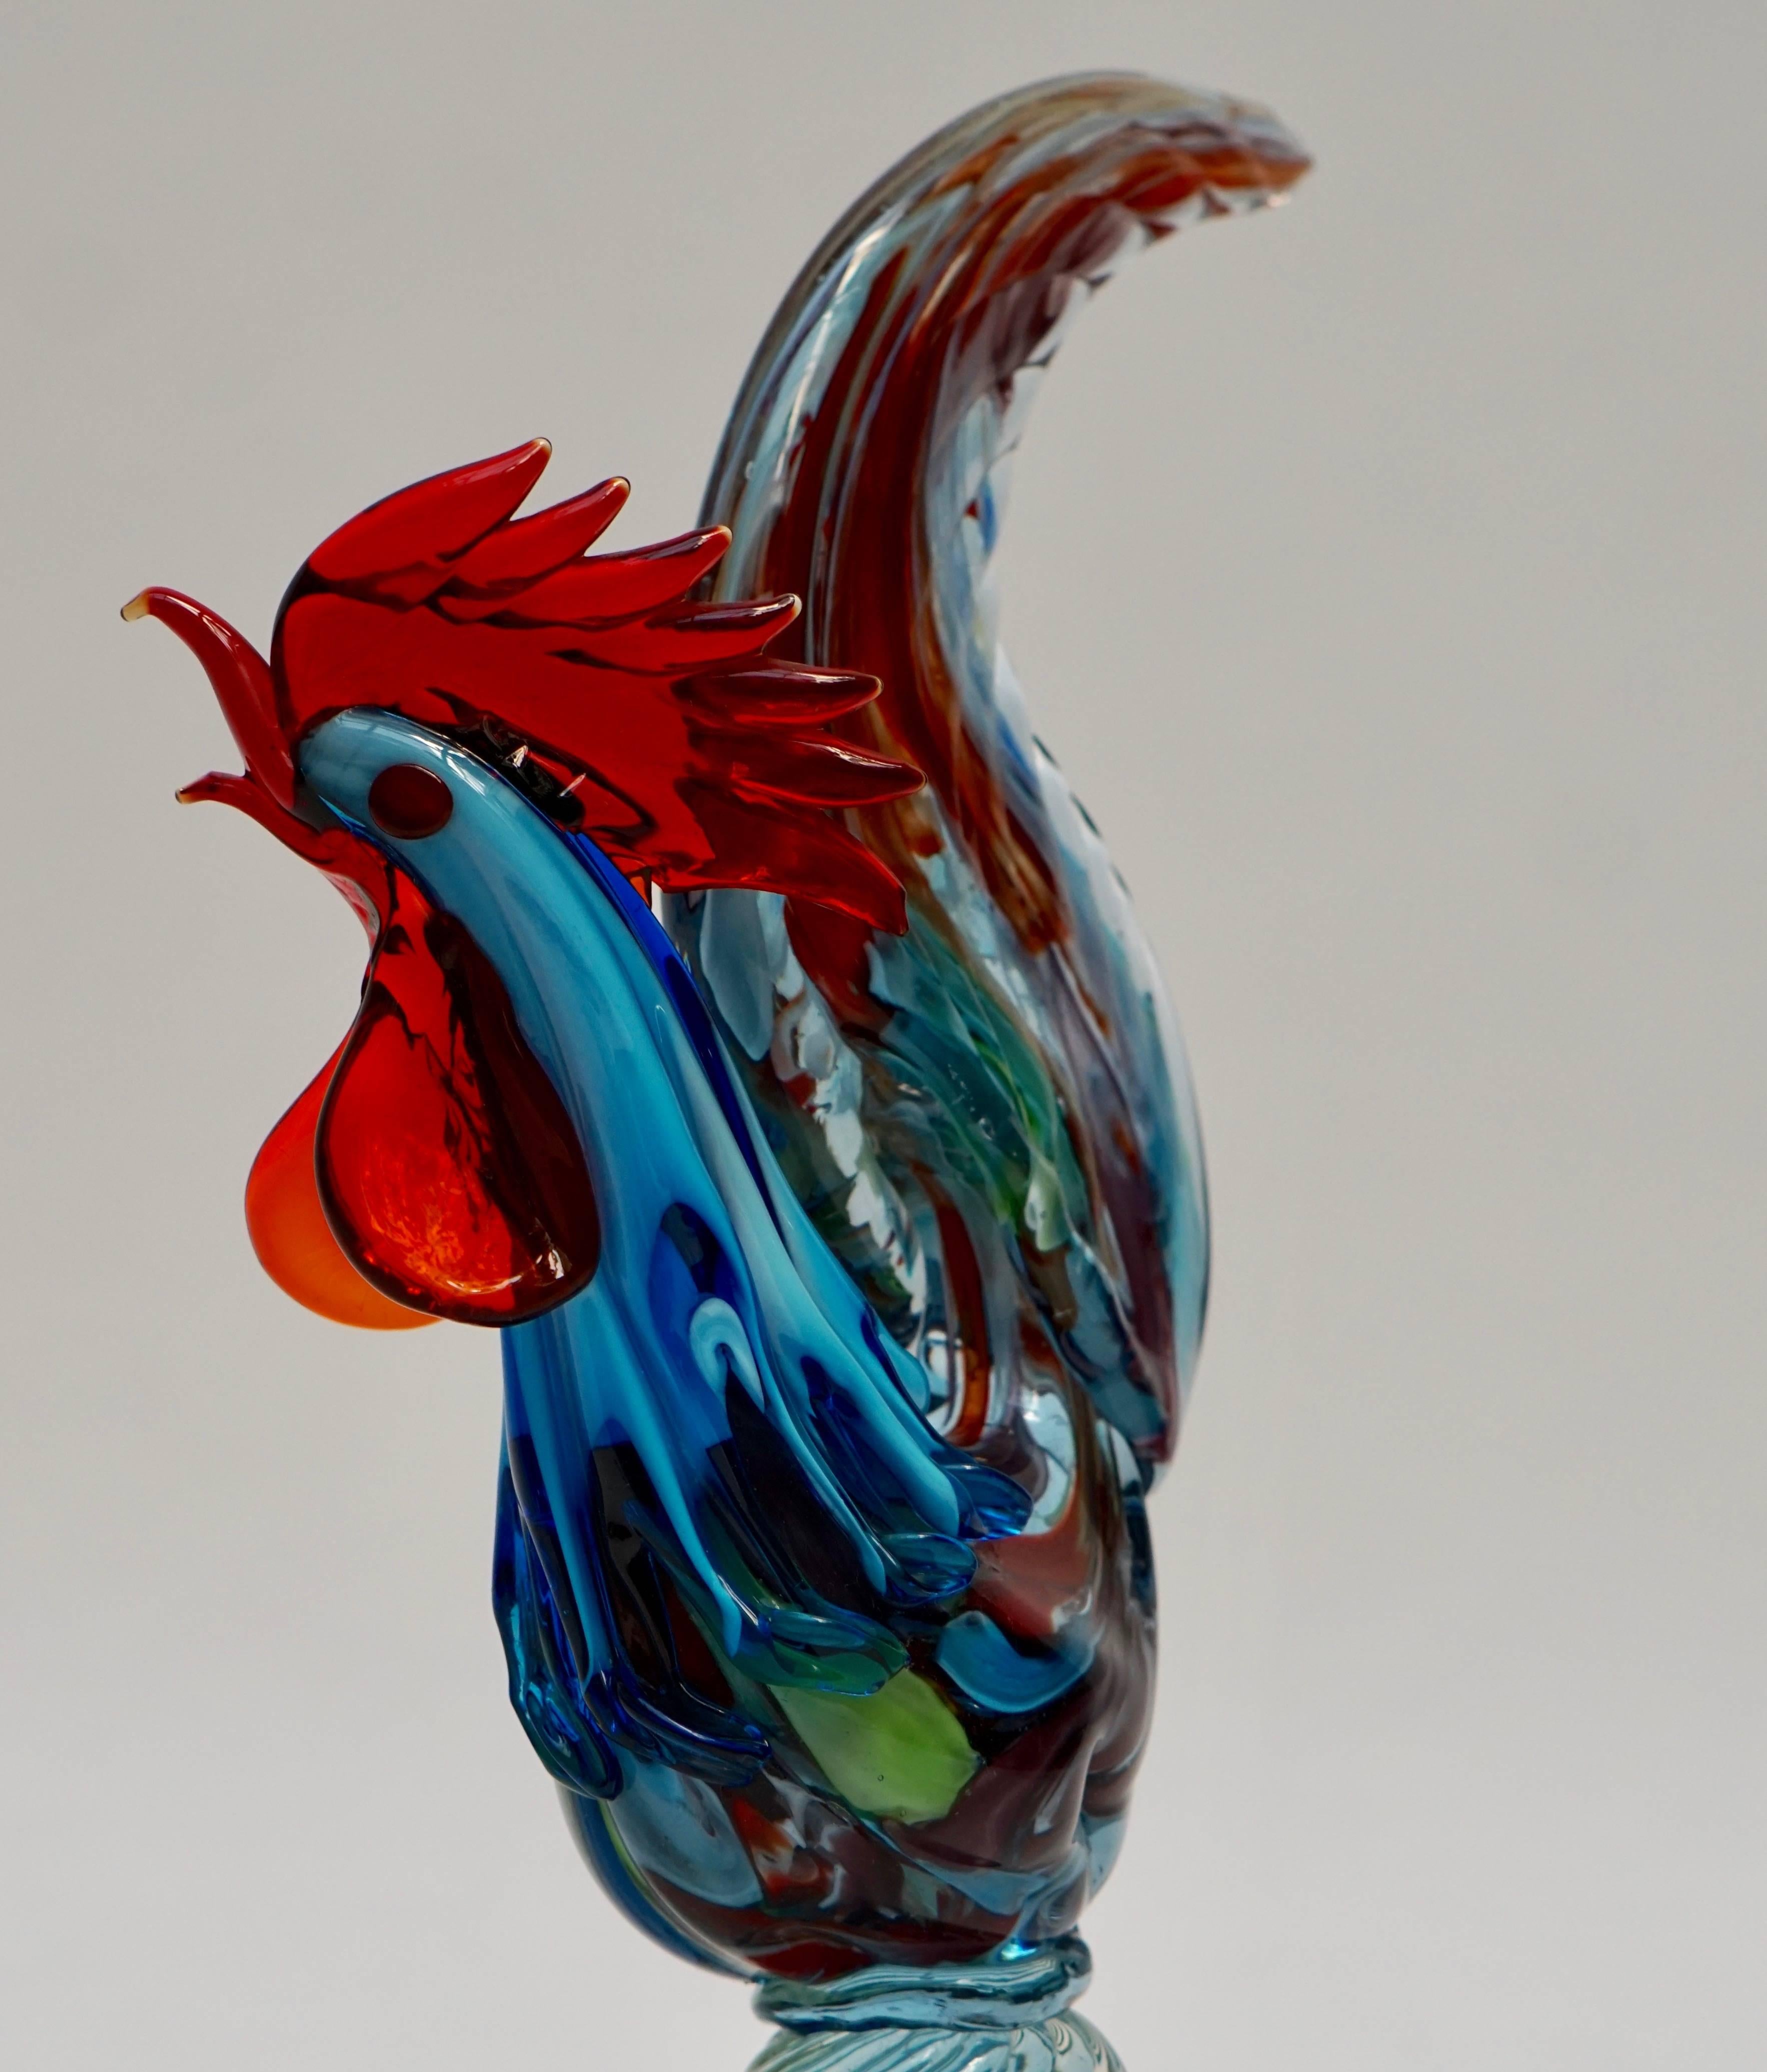 Murano glass sculpture of a rooster.
Italian Mid-Century Modern Murano handblown glass rooster sculpture. Having beautiful multi colors and clear glass.

Measures: 
Height 39 cm.
Width 25 cm.
Depth 11 cm.